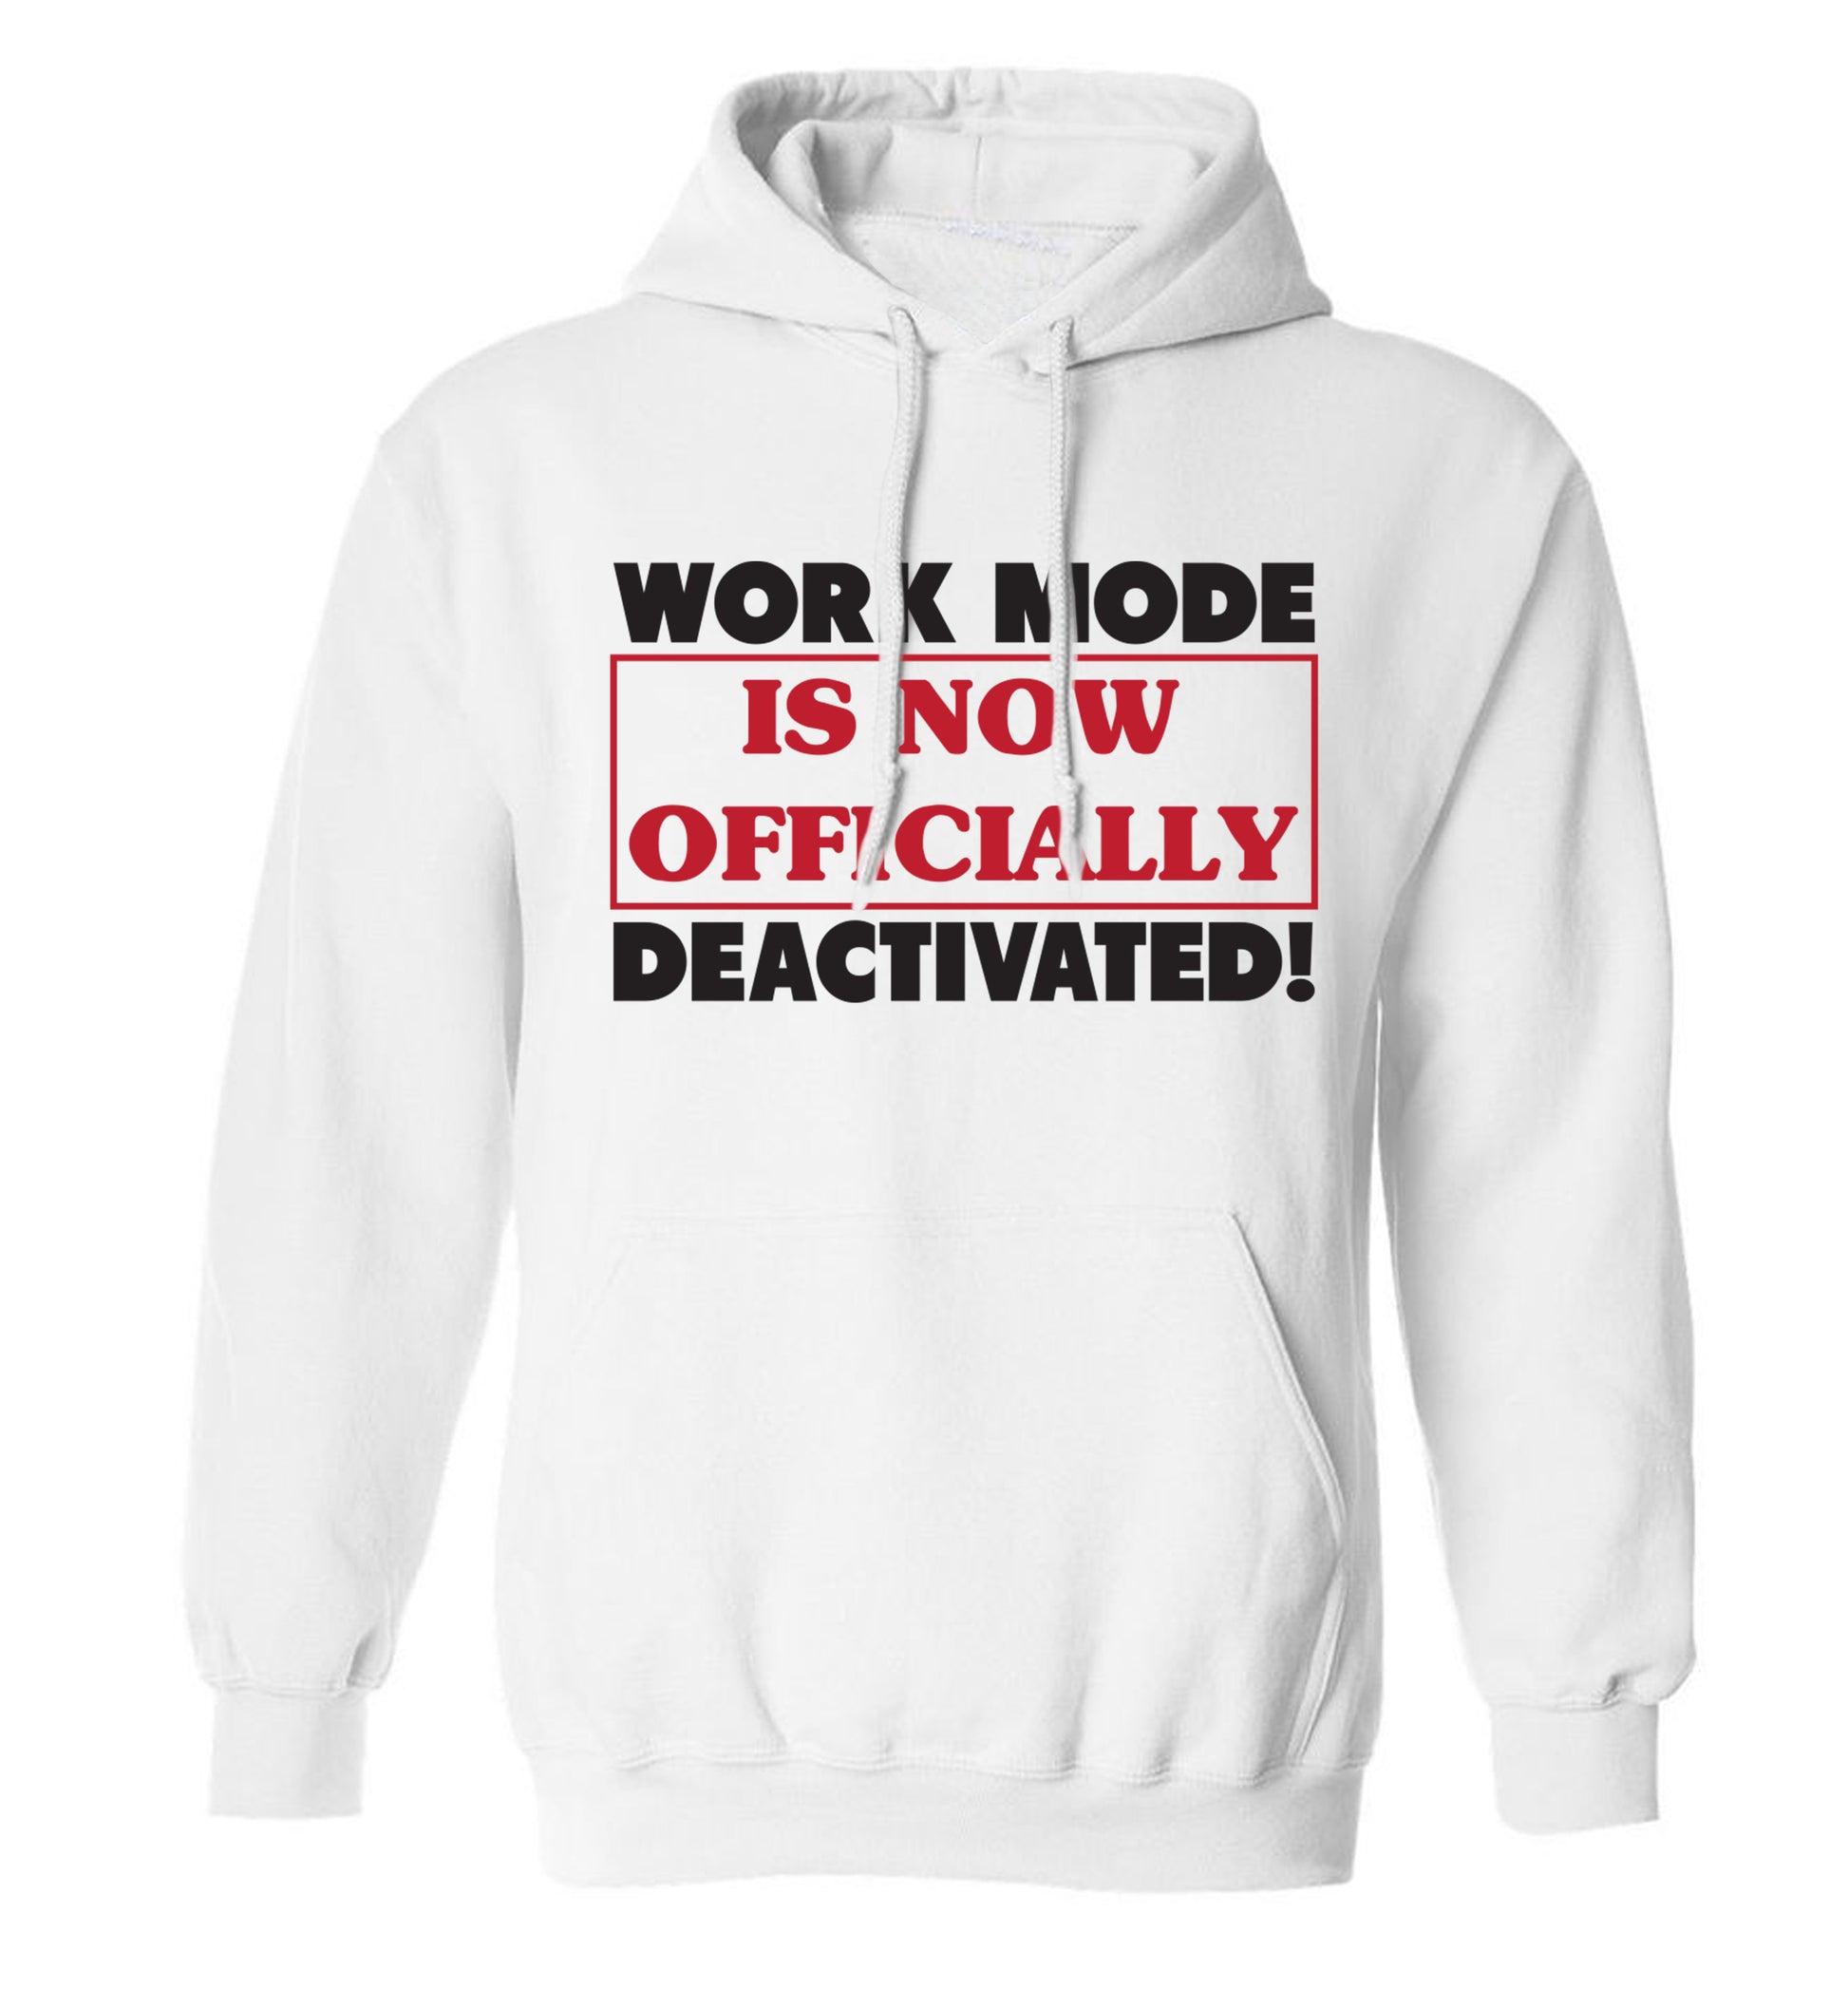 Work mode is now officially deactivated adults unisex white hoodie 2XL